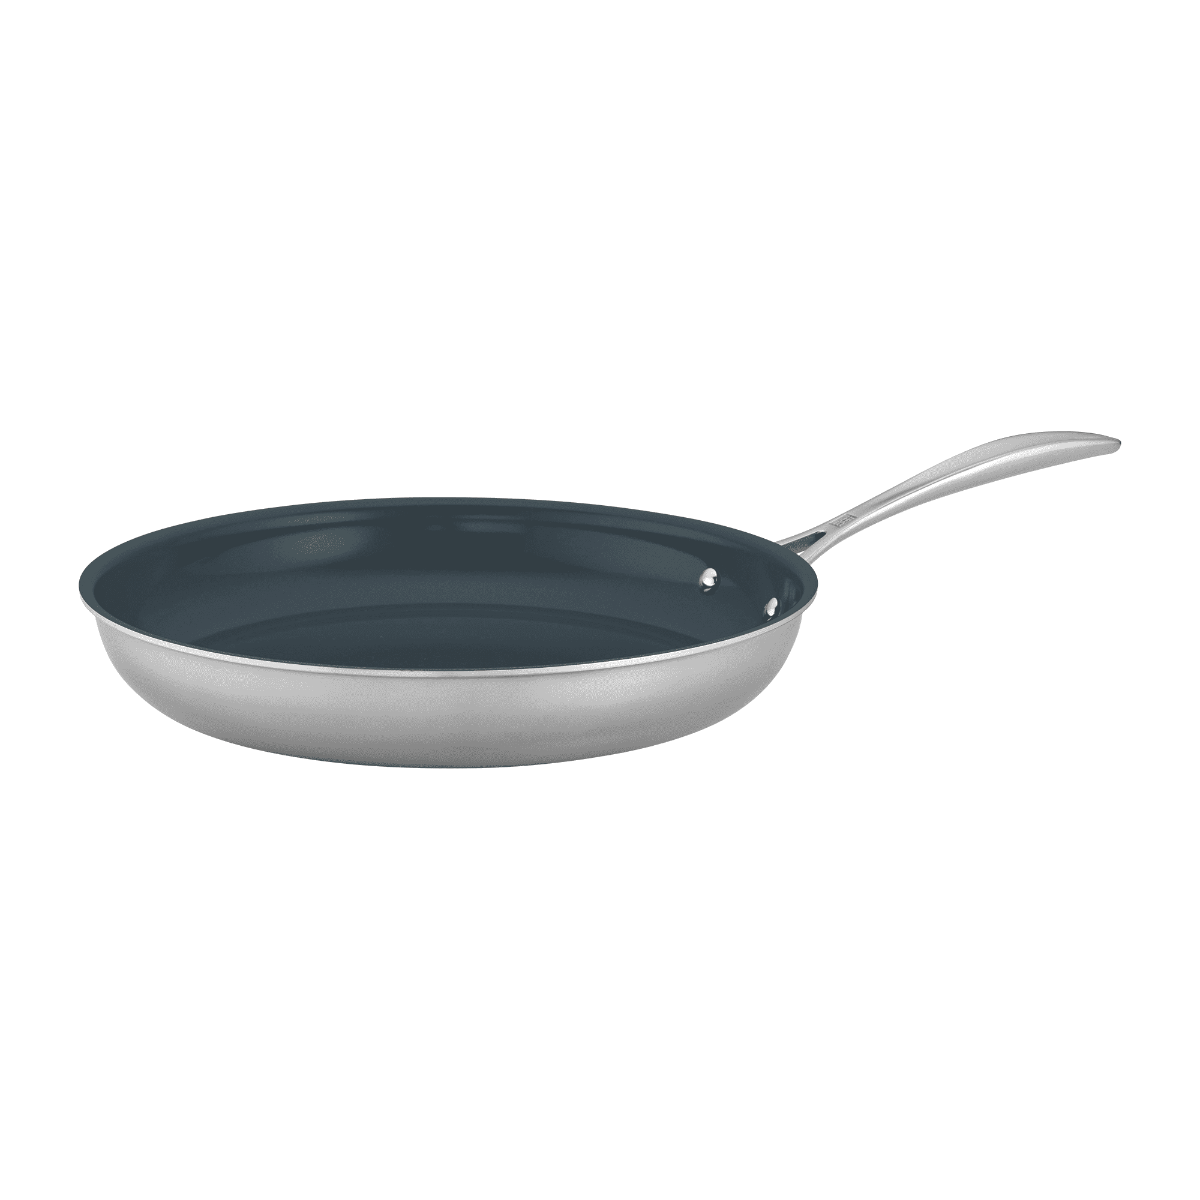 https://cdn.shopify.com/s/files/1/0473/5398/7229/products/zwilling-zwilling-clad-cfx-12-stainless-steel-ceramic-non-stick-fry-pan-035886422011-19592514797728_1600x.png?v=1626103774